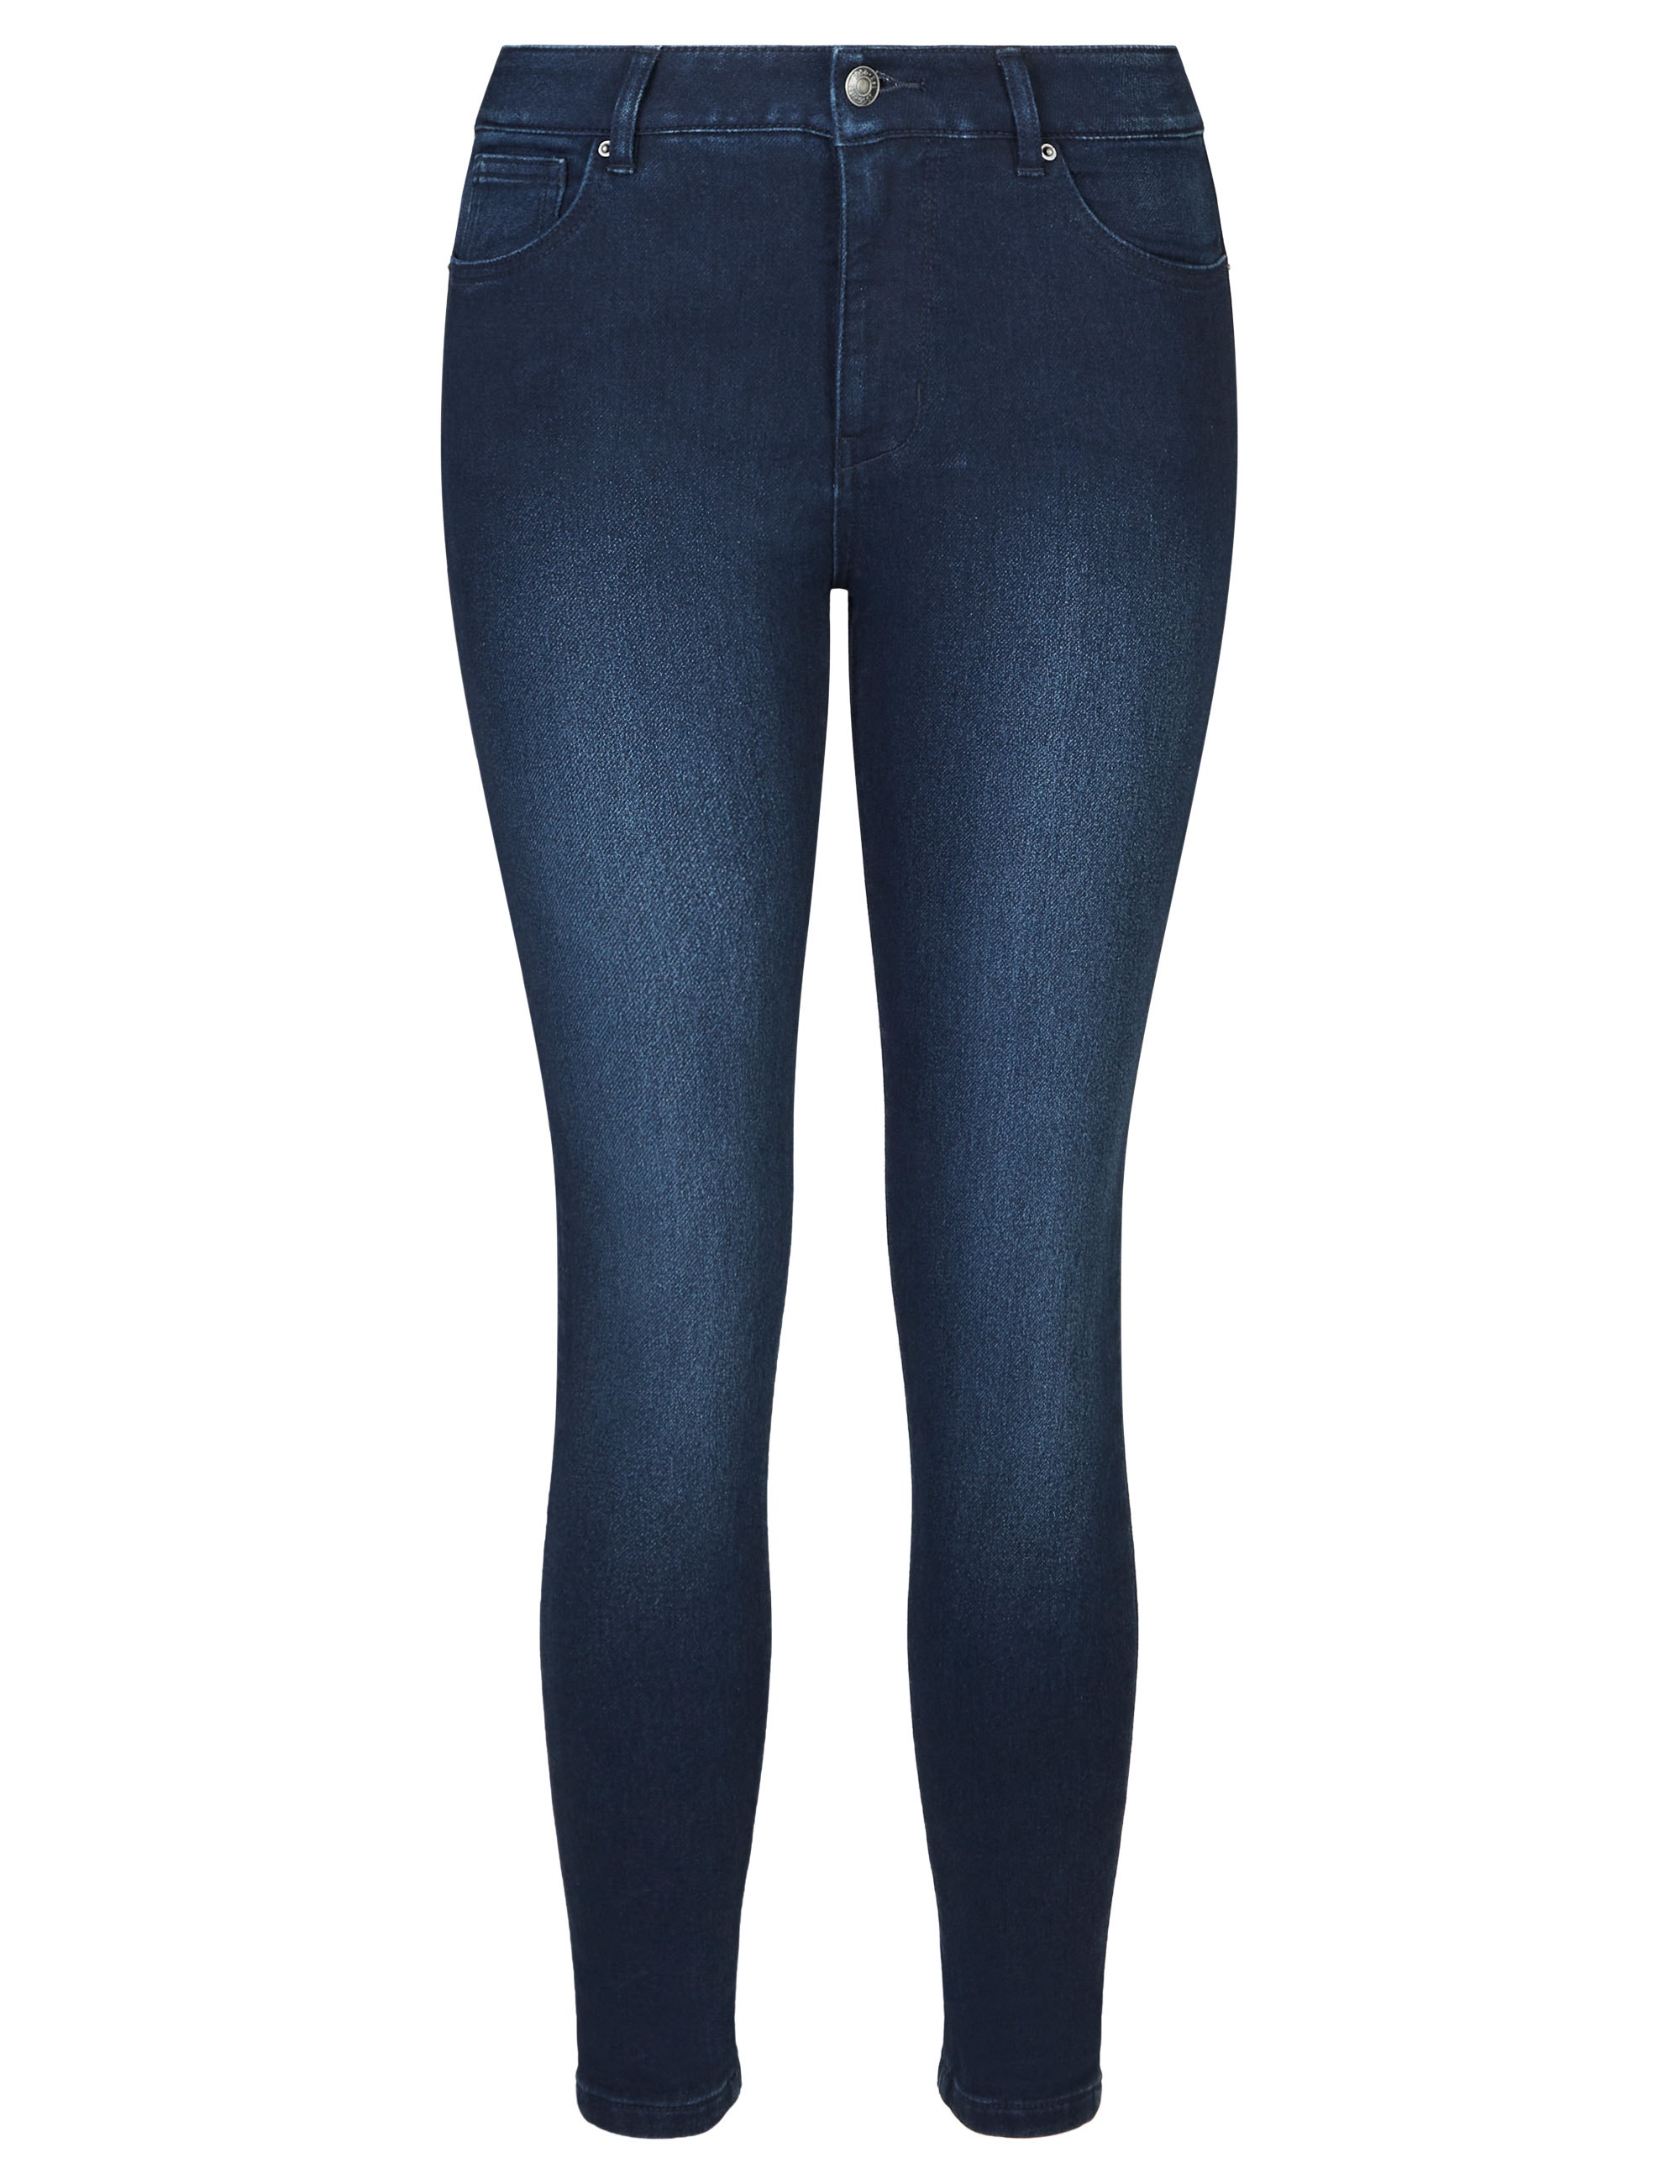 KATIES - Womens Jeans - Blue - Full Length - Knit Jeggings - Women's  Clothing